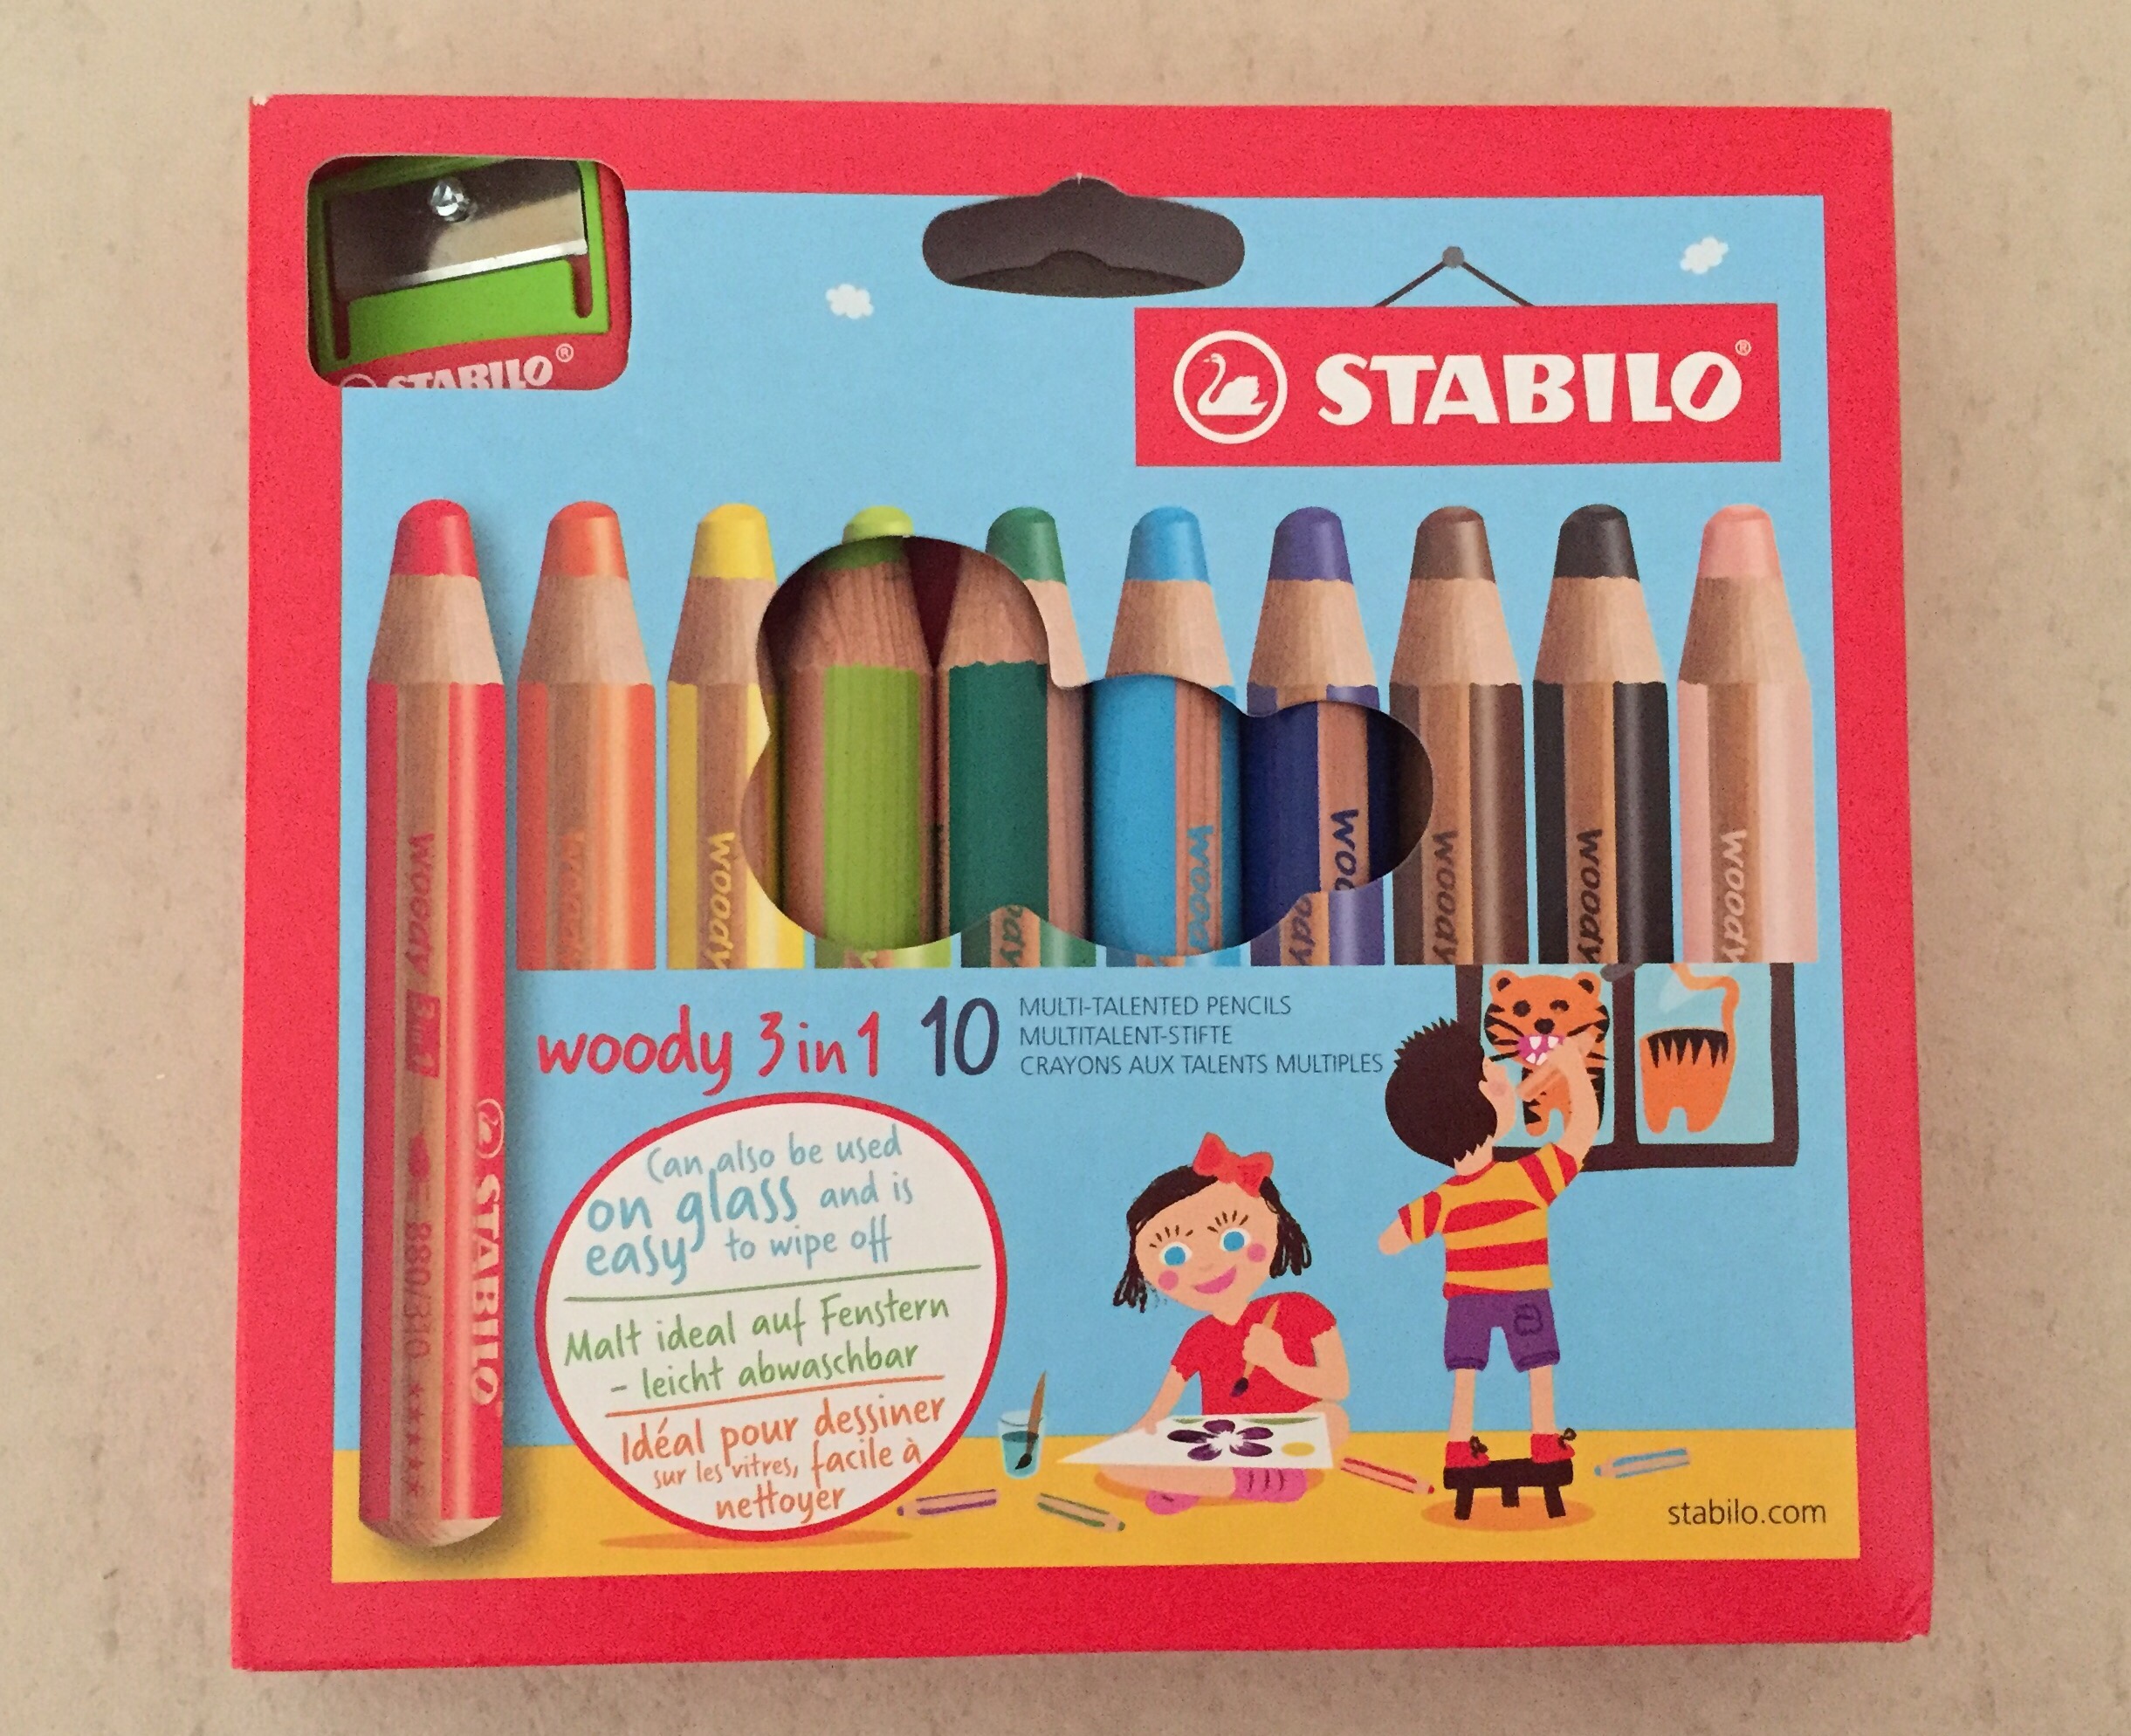 Stabilo Woody 3in1 Colour Pencils Review – Chronicles of Yoyo